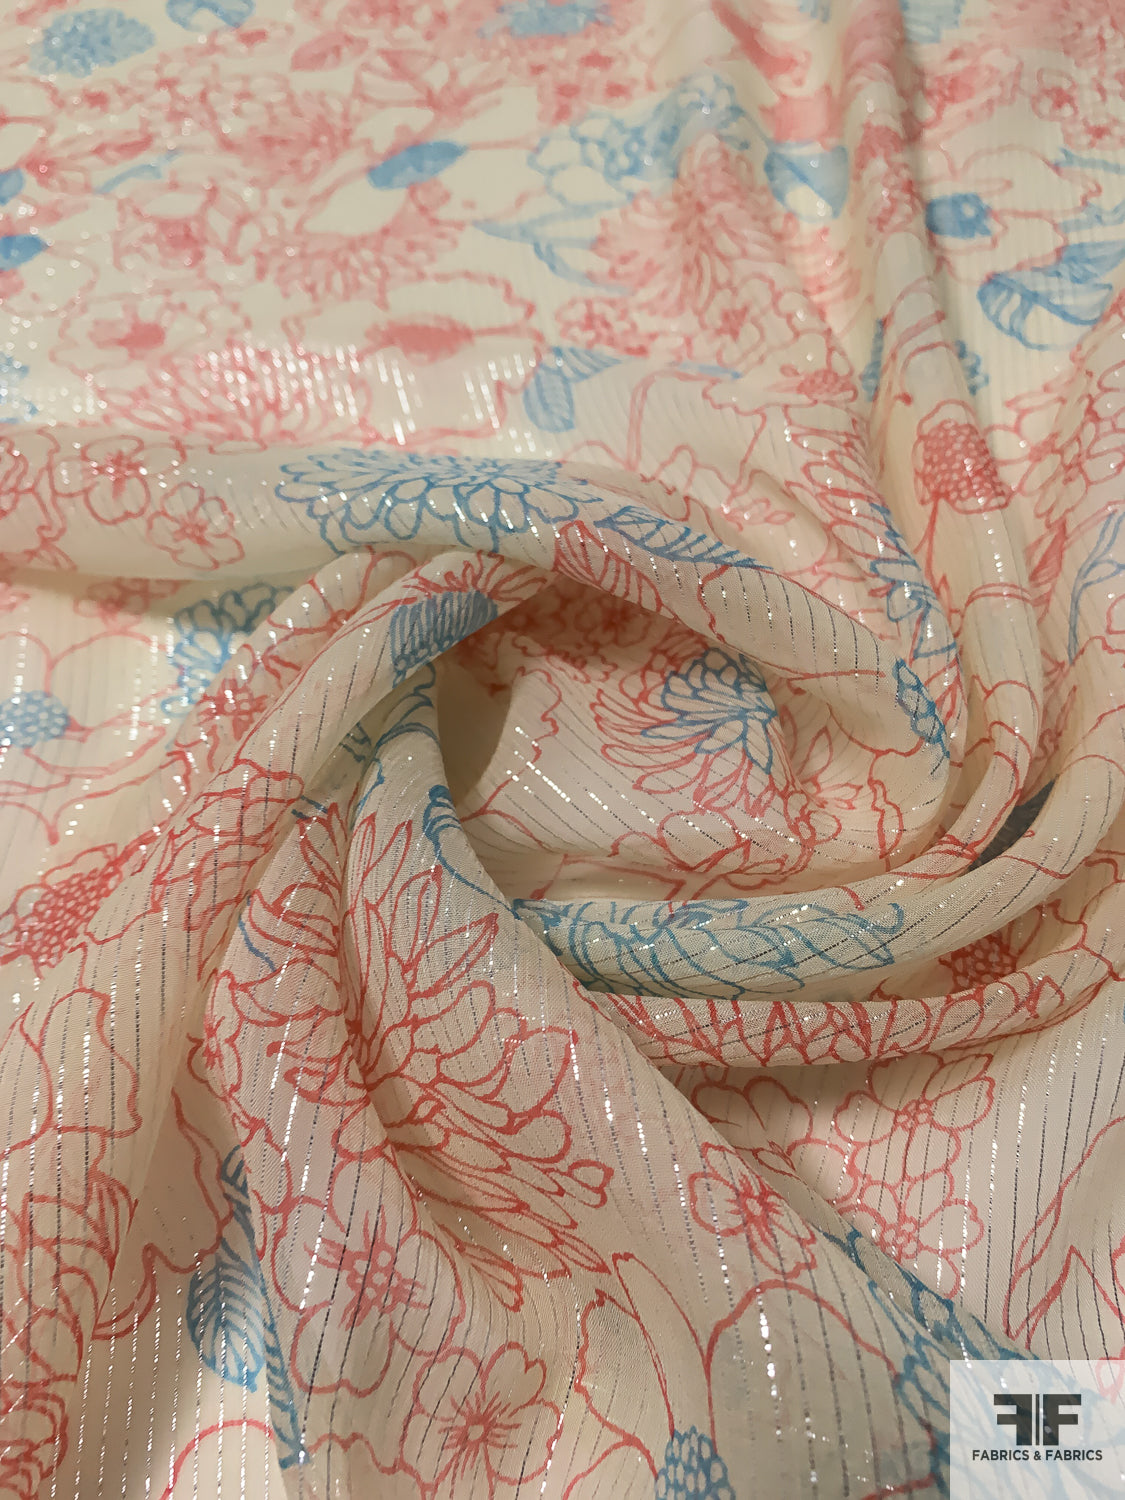 Floral Sketch Printed Silk Chiffon with Silver Lurex Pinstripes - Pastel Creamy Yellow / Deep Coral / Turquoise